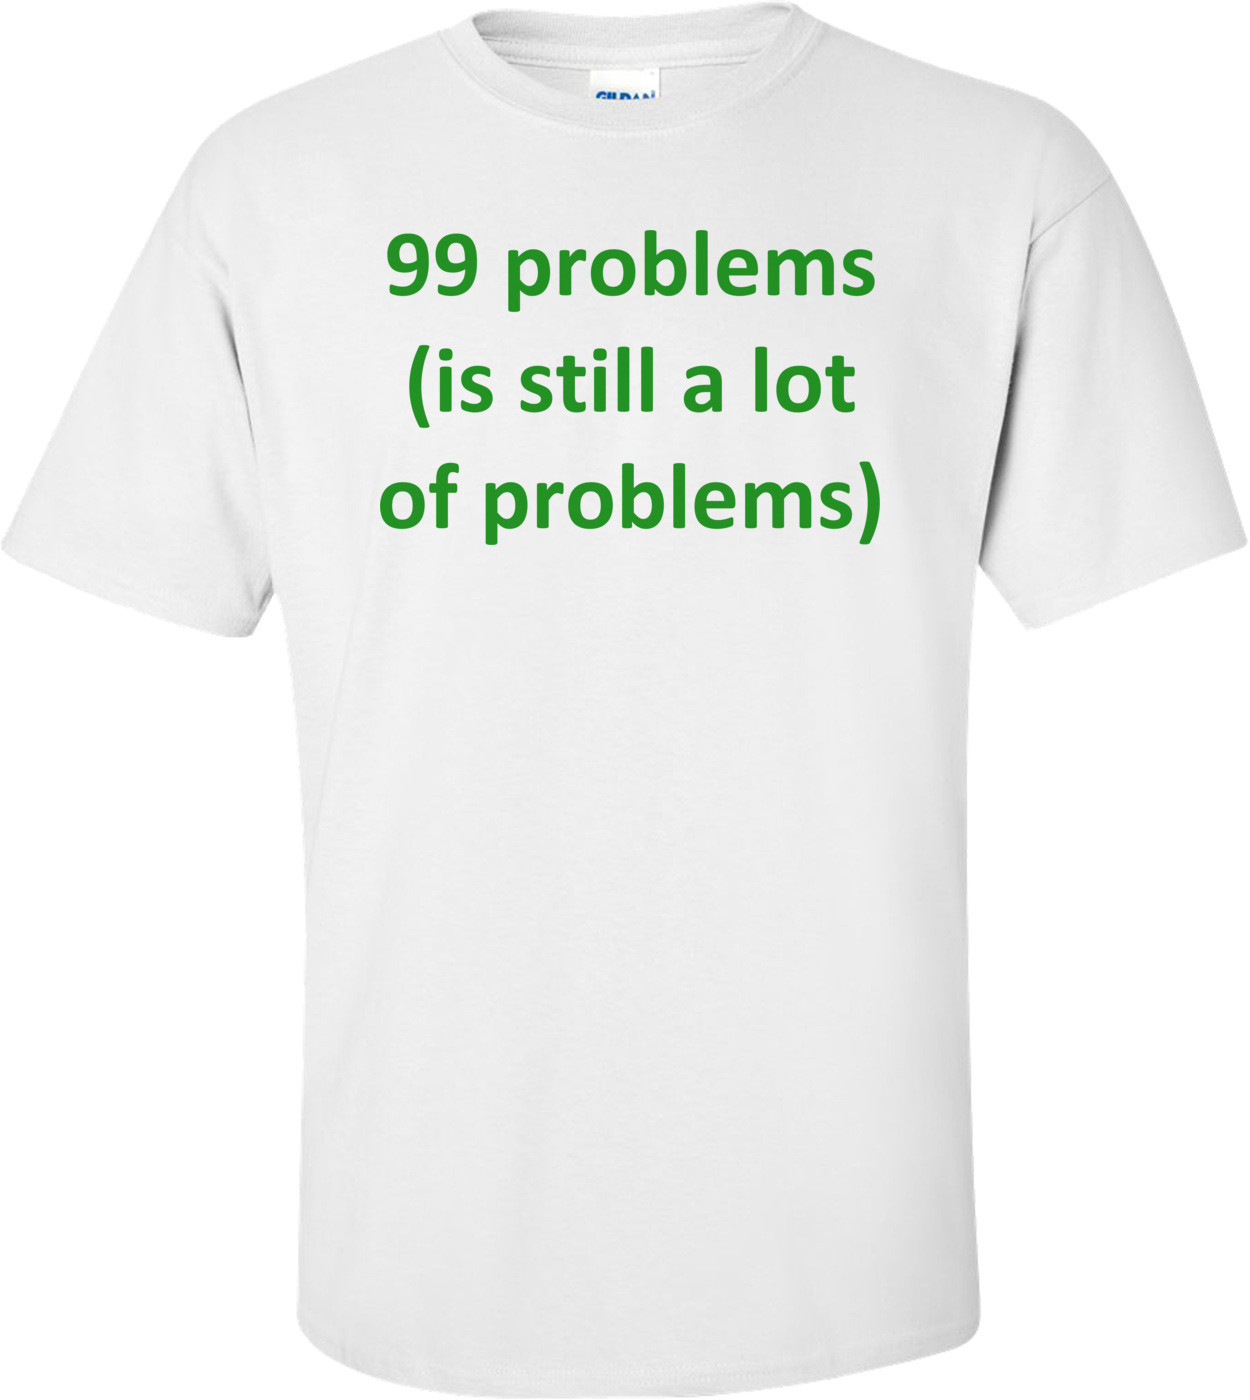 99 problems (is still a lot of problems) Shirt